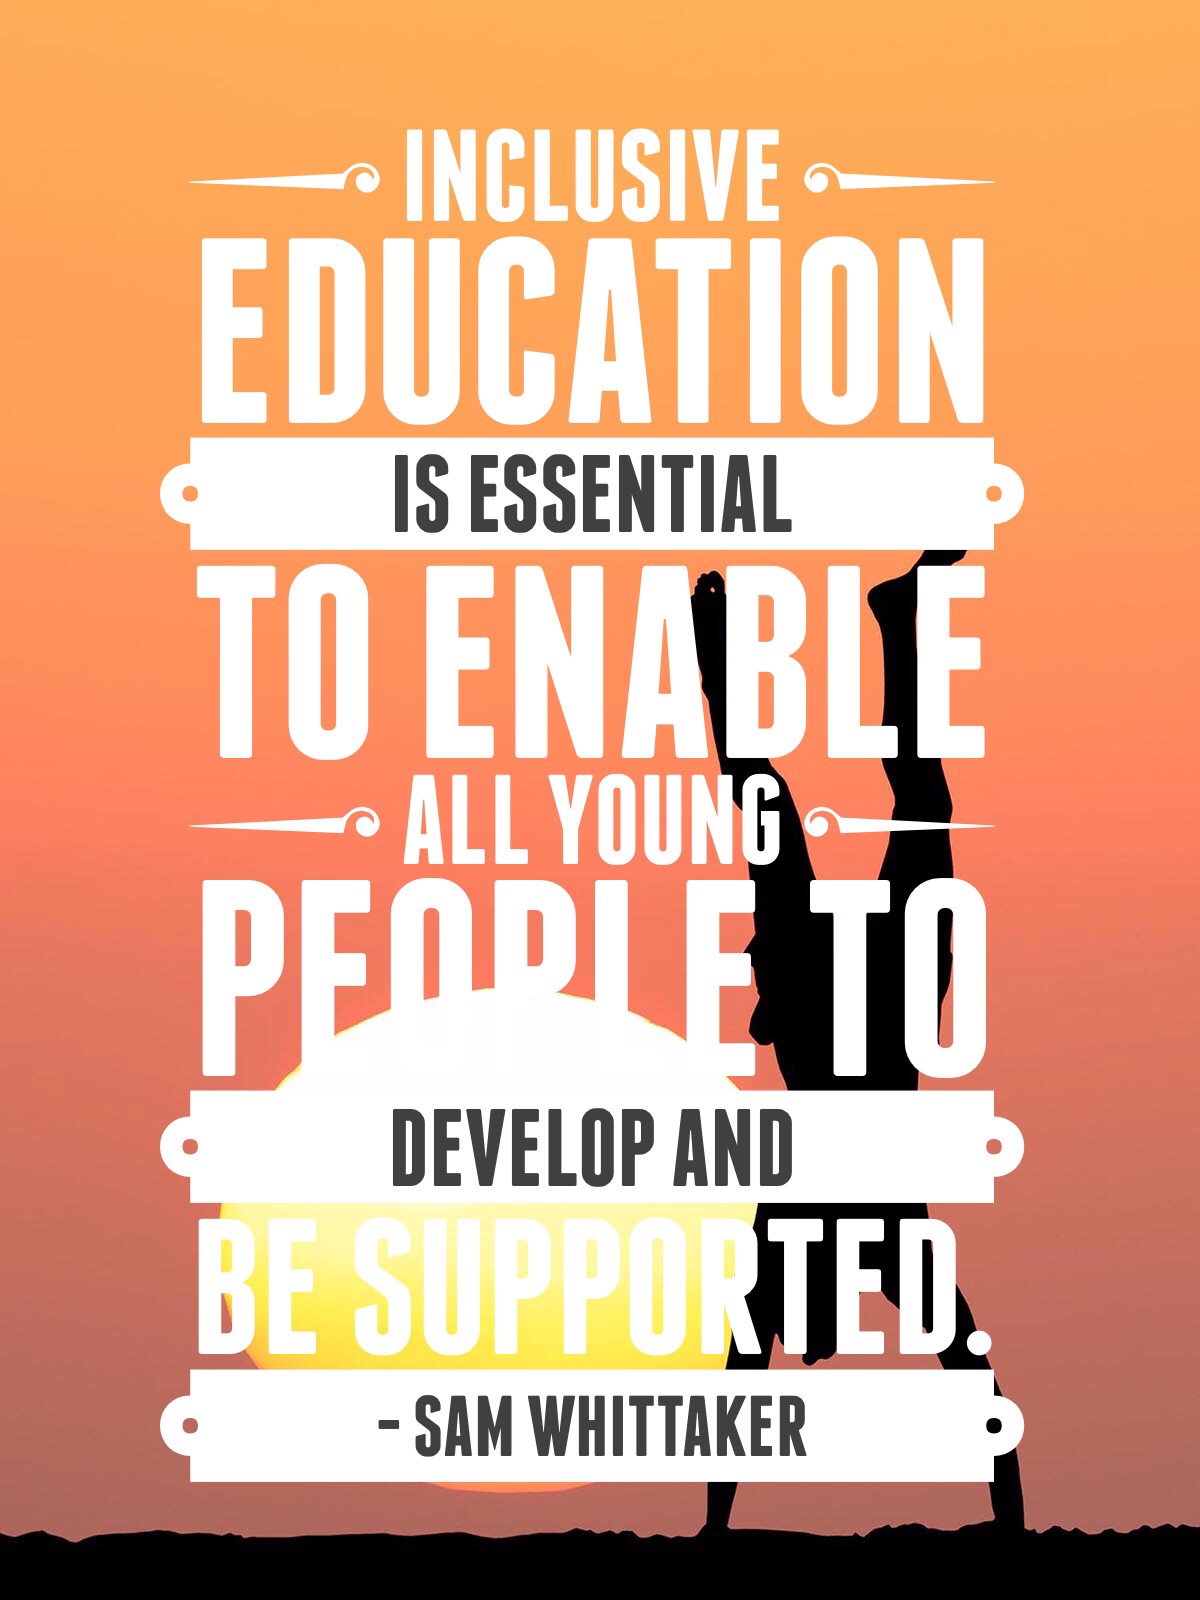 Inclusive education is essential to enable all young people to develop and be supported. - Sam Whittaker